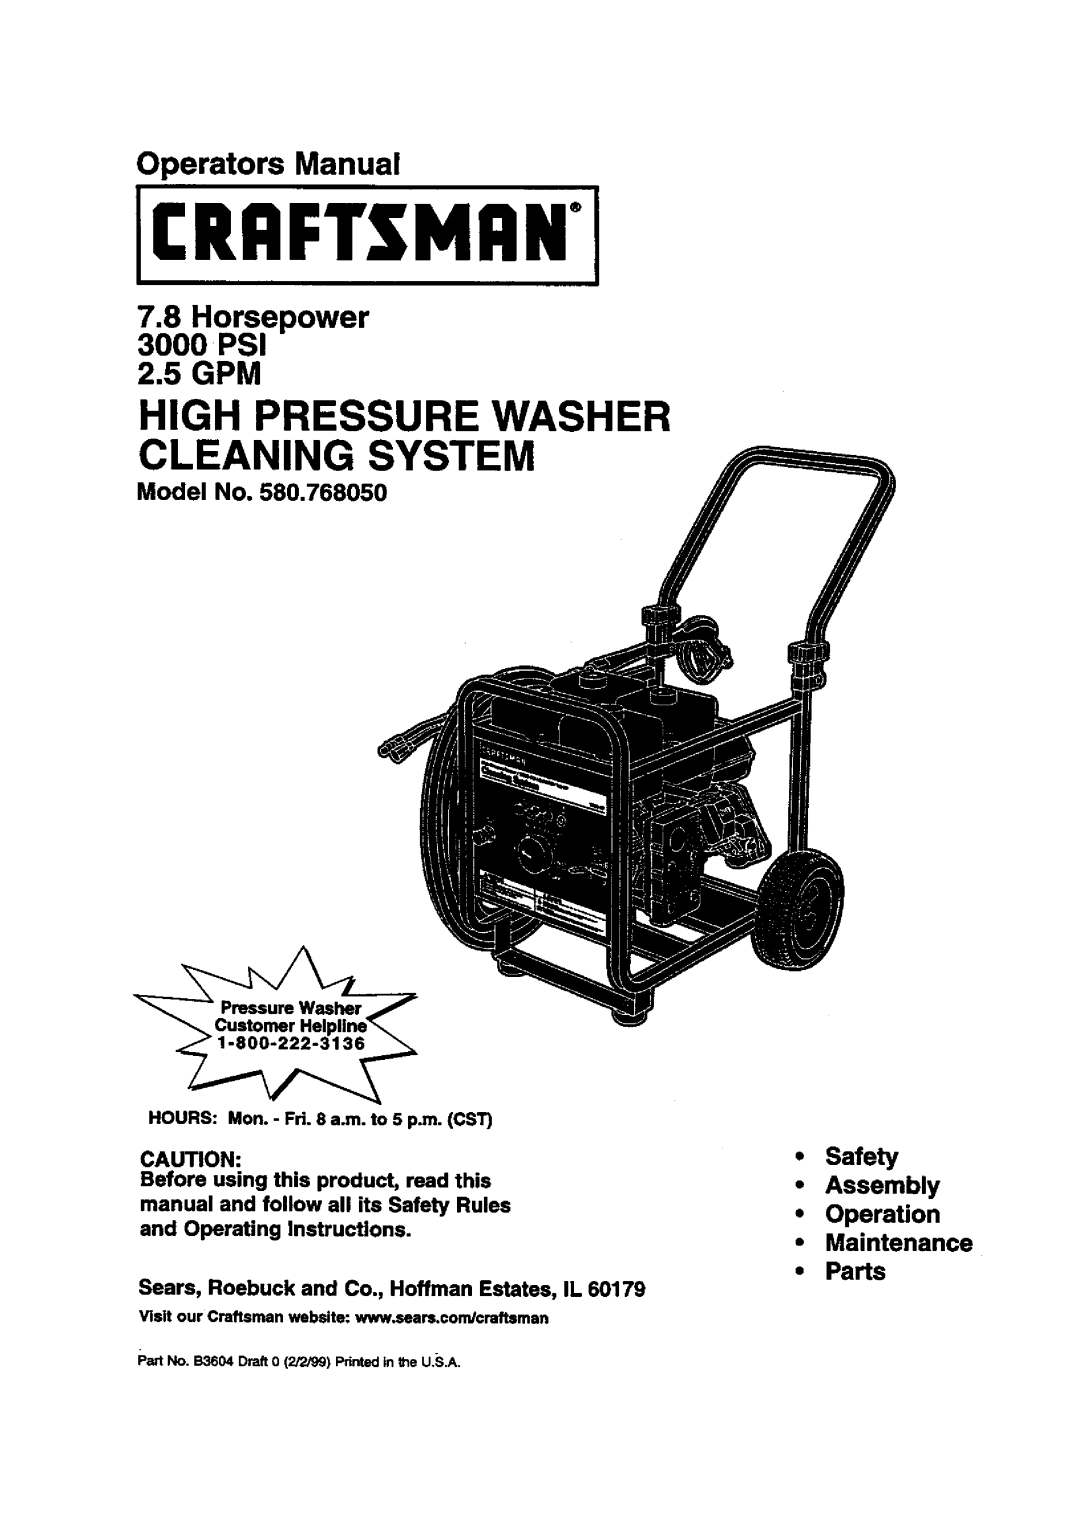 Sears 580.768050 manual Craftsmani, High Pressure Washer Cleaning System, Operators Manual, 7.8Horsepower 3000 PSI 2.5 GPM 